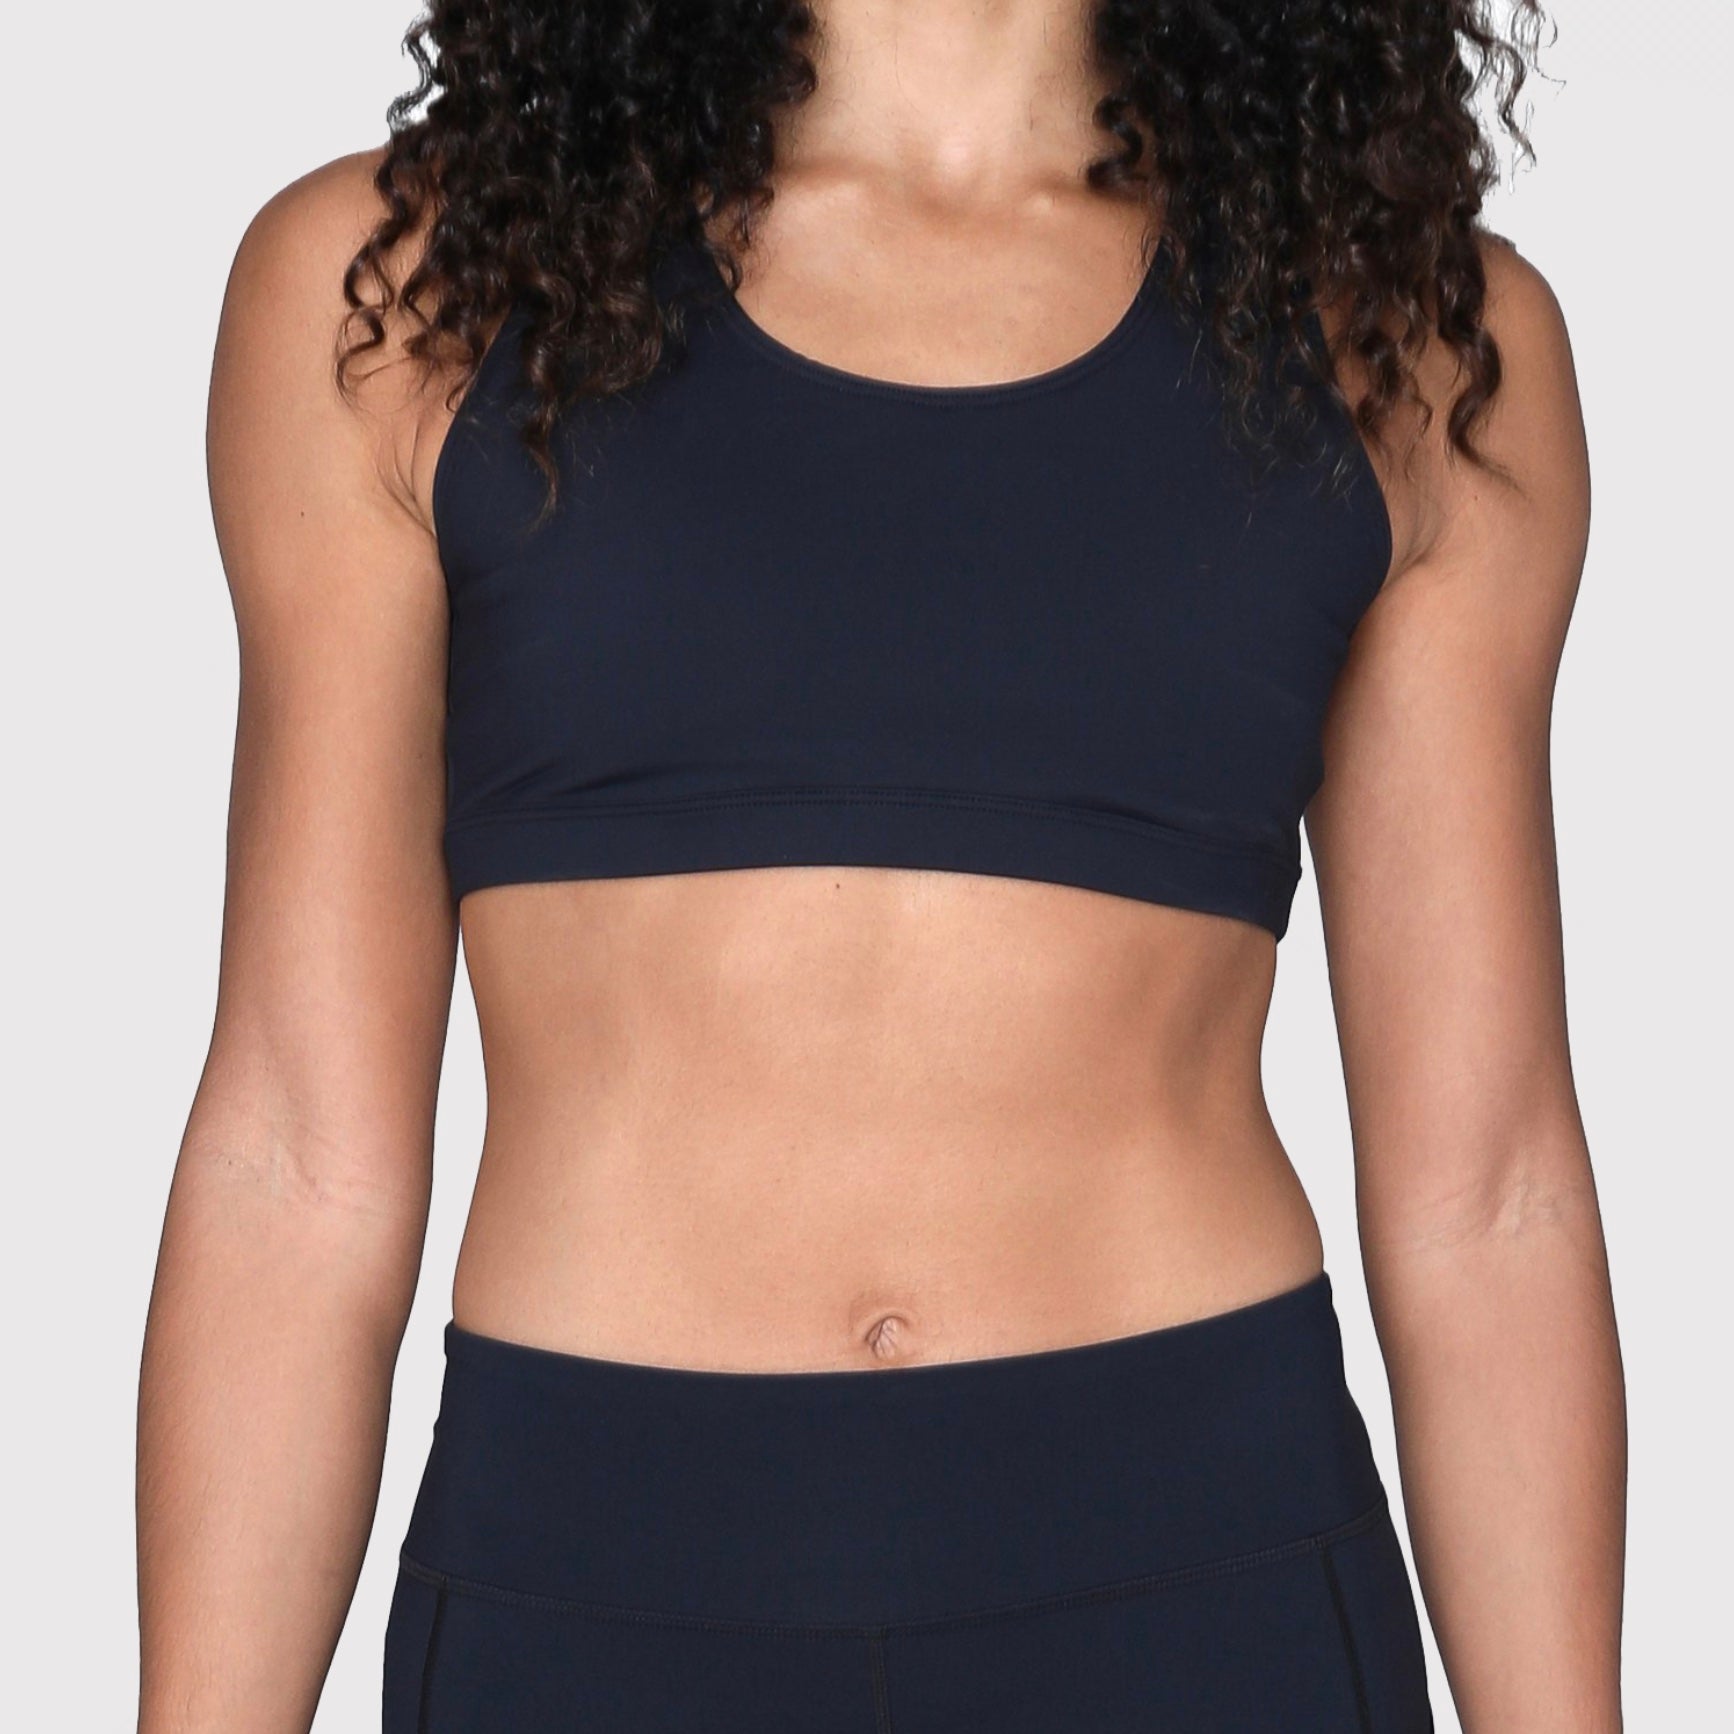 This Comfortable $19 Sports Bra Is a Lululemon Dupe